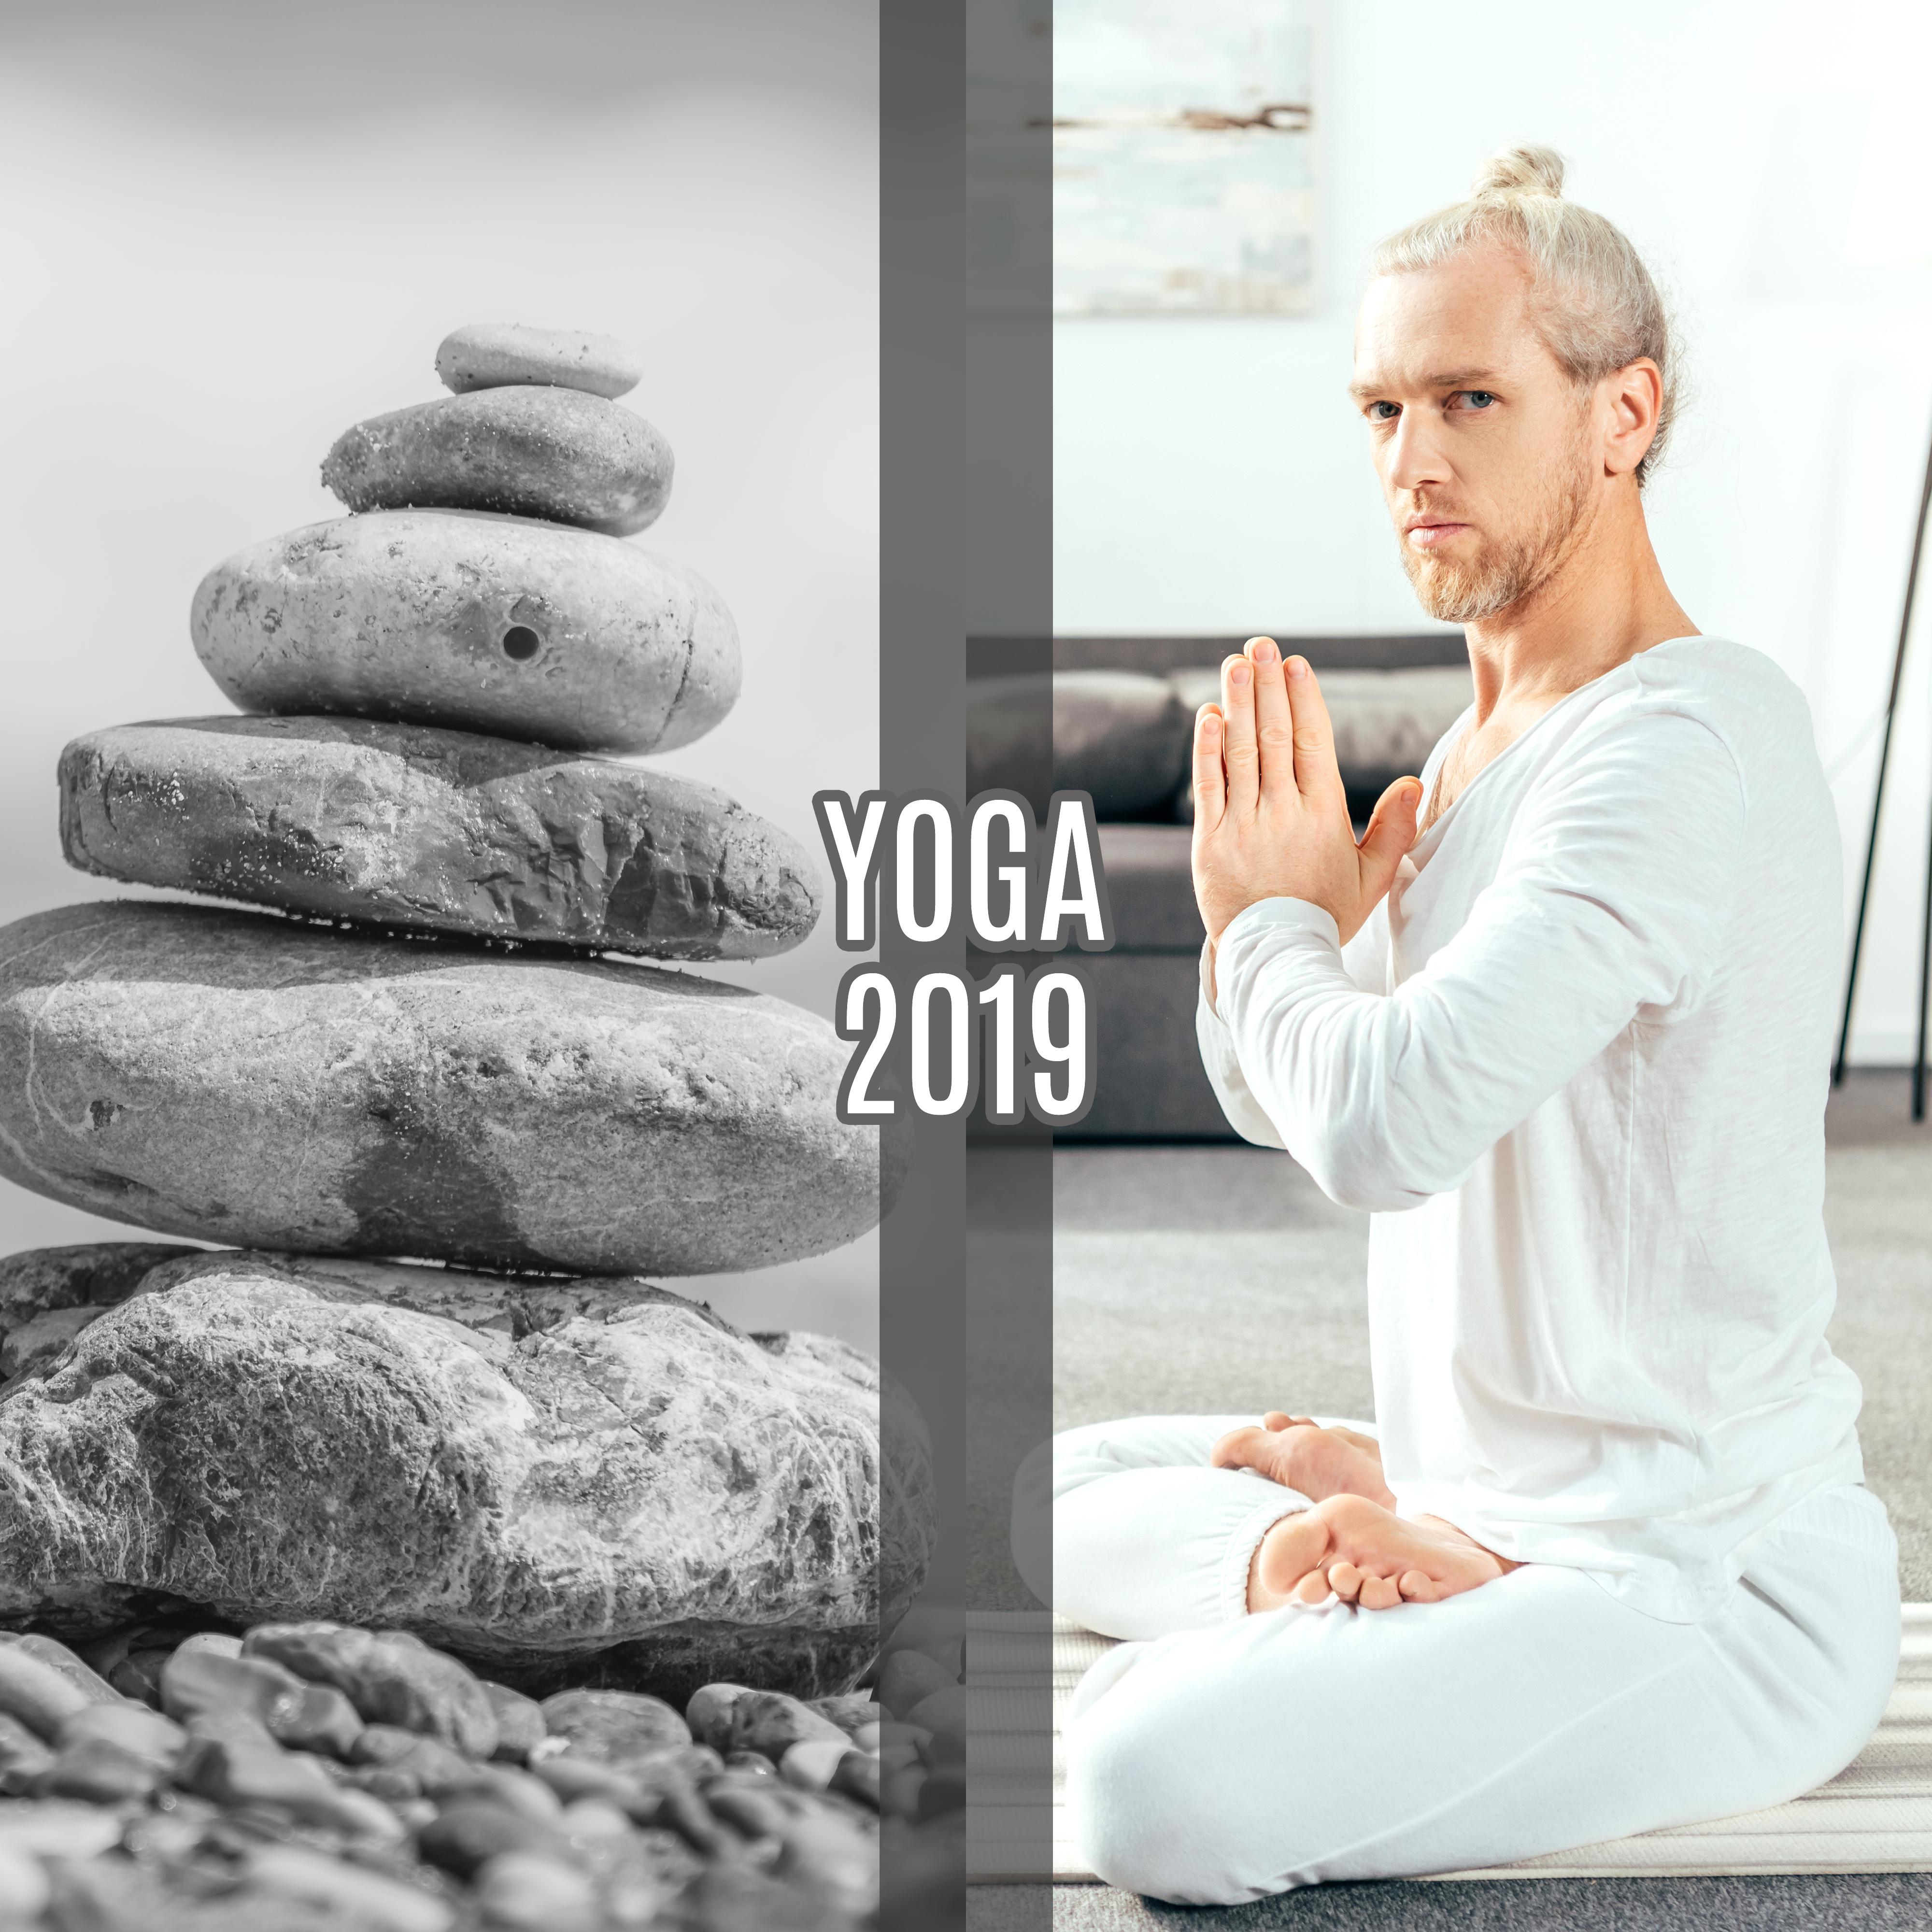 Yoga 2019 – Meditation Music Zone, Peaceful Melodies for Relaxation, Zen Lounge, Meditation Therapy, Yoga Meditation, Mindfulness Ambient Sounds